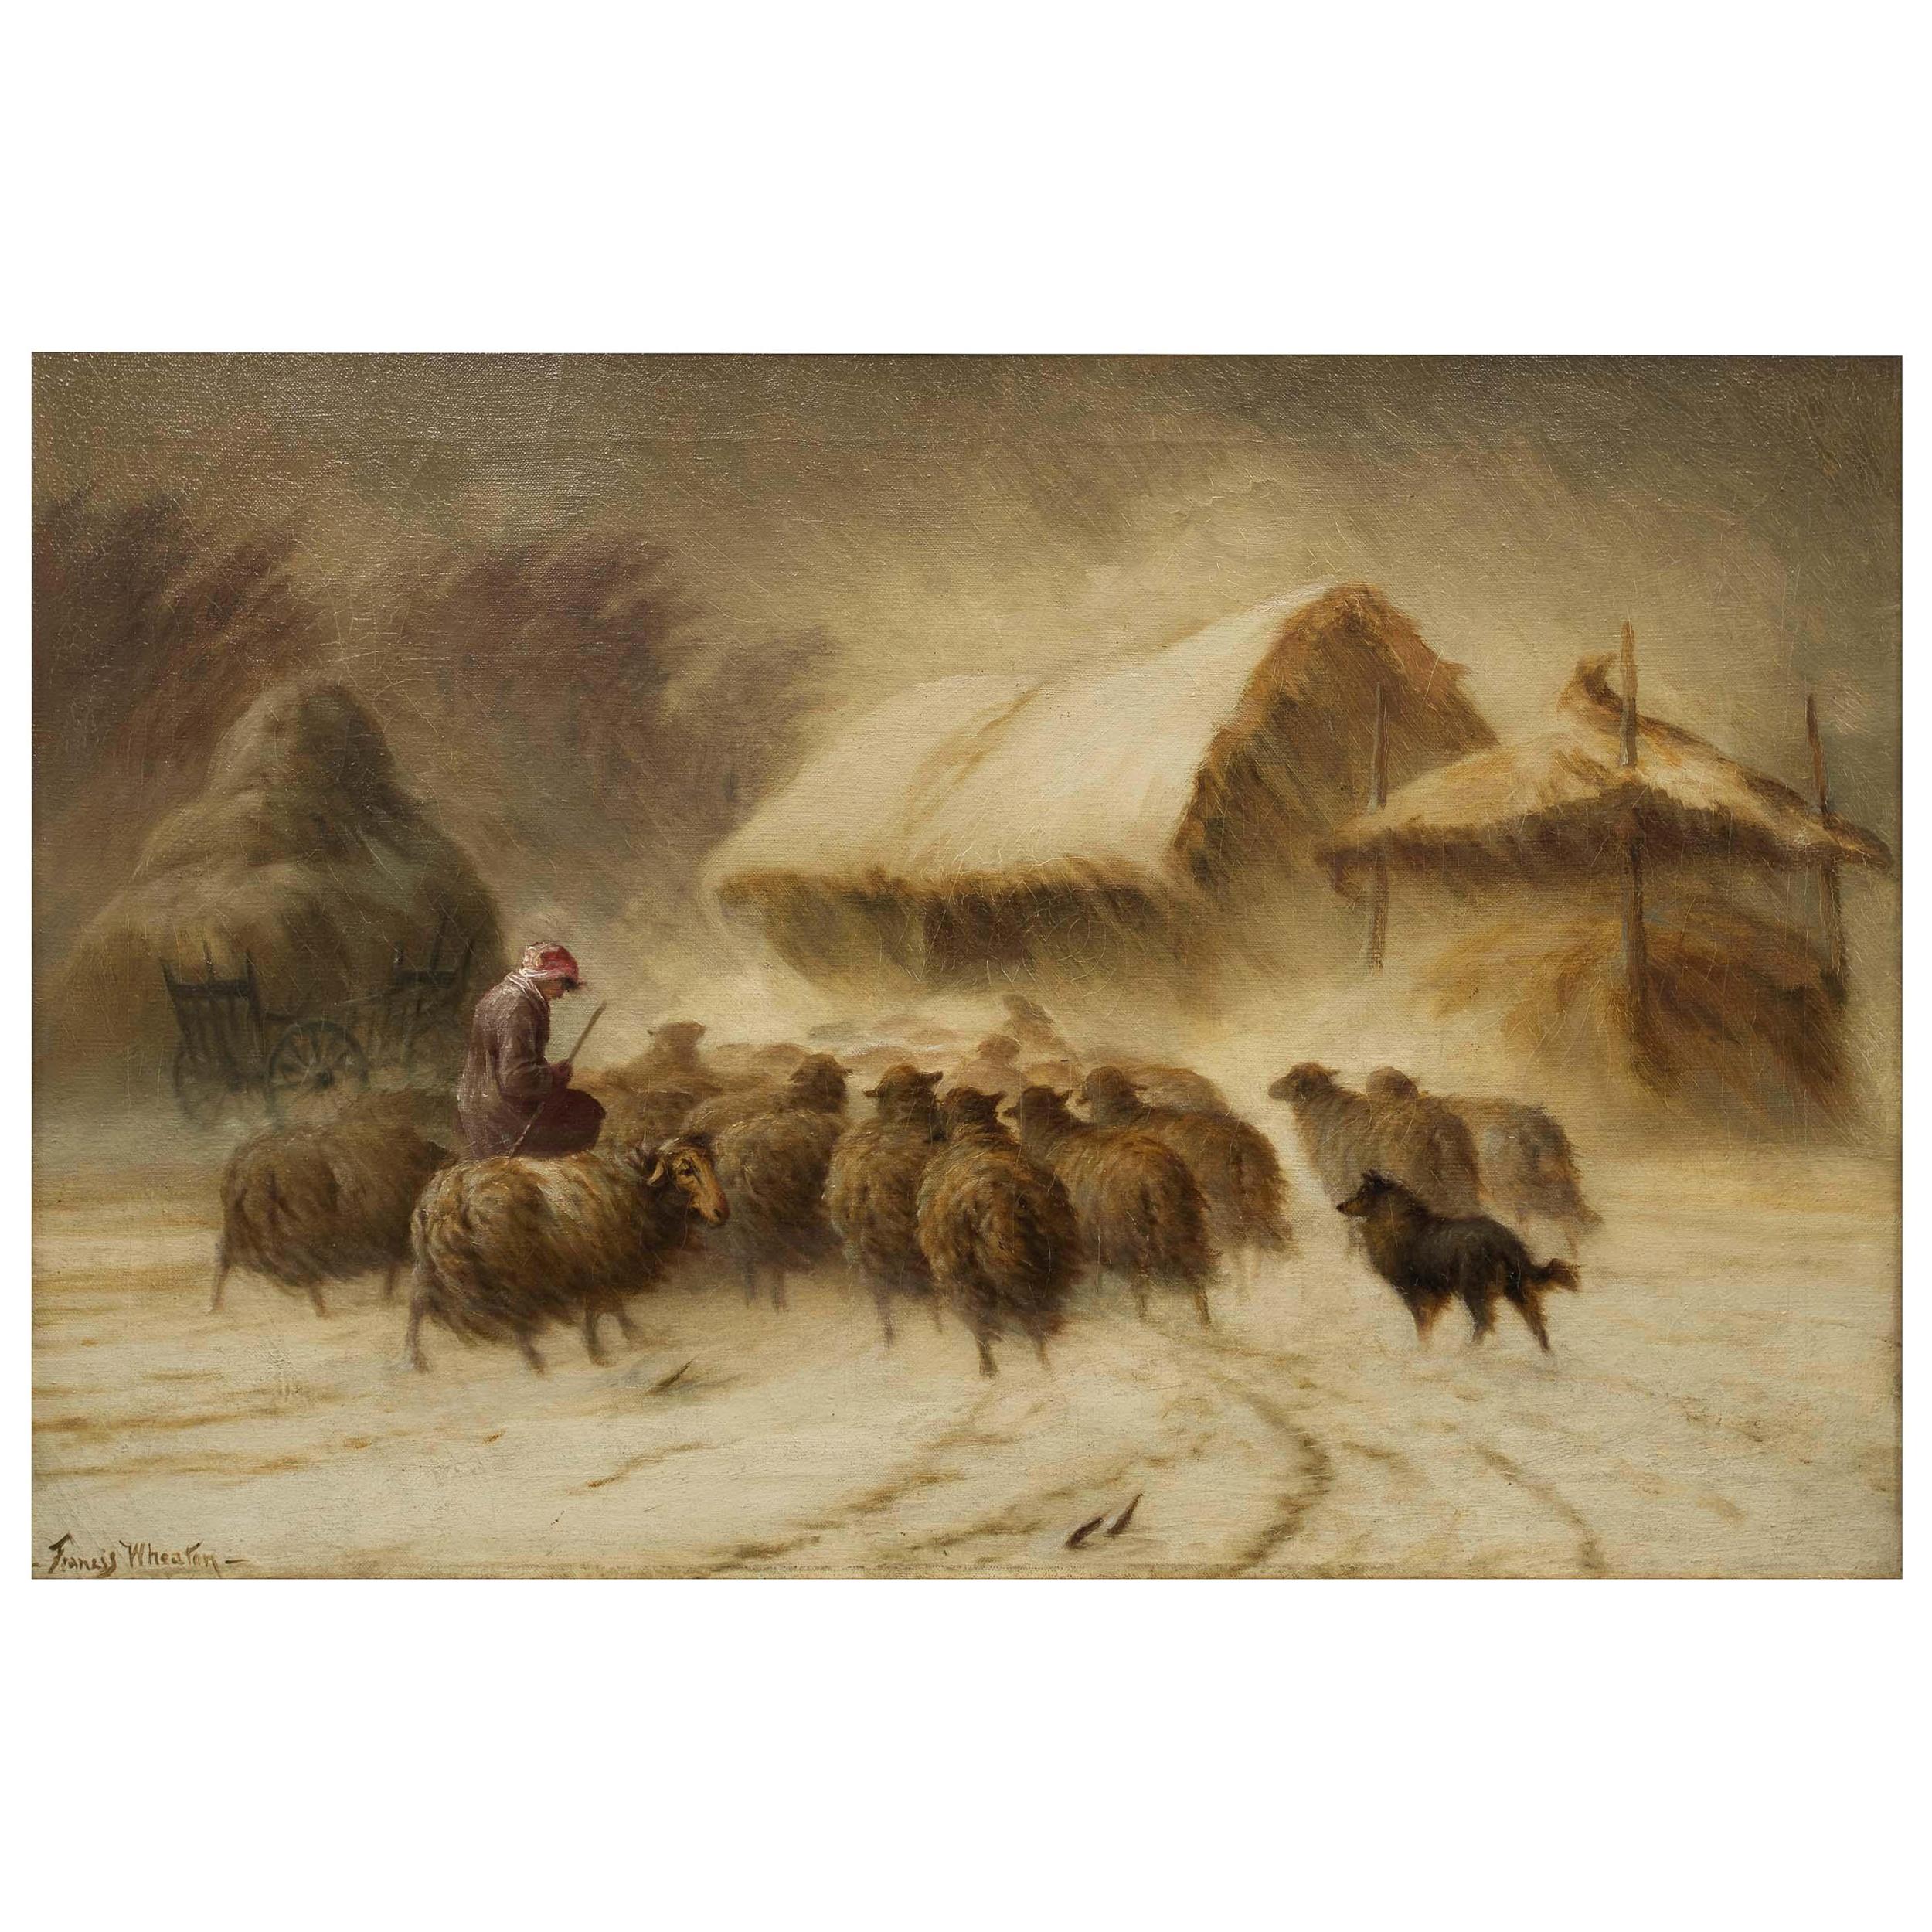 Antique American Landscape Painting "Herding Sheep in Snow" by Francis Wheaton